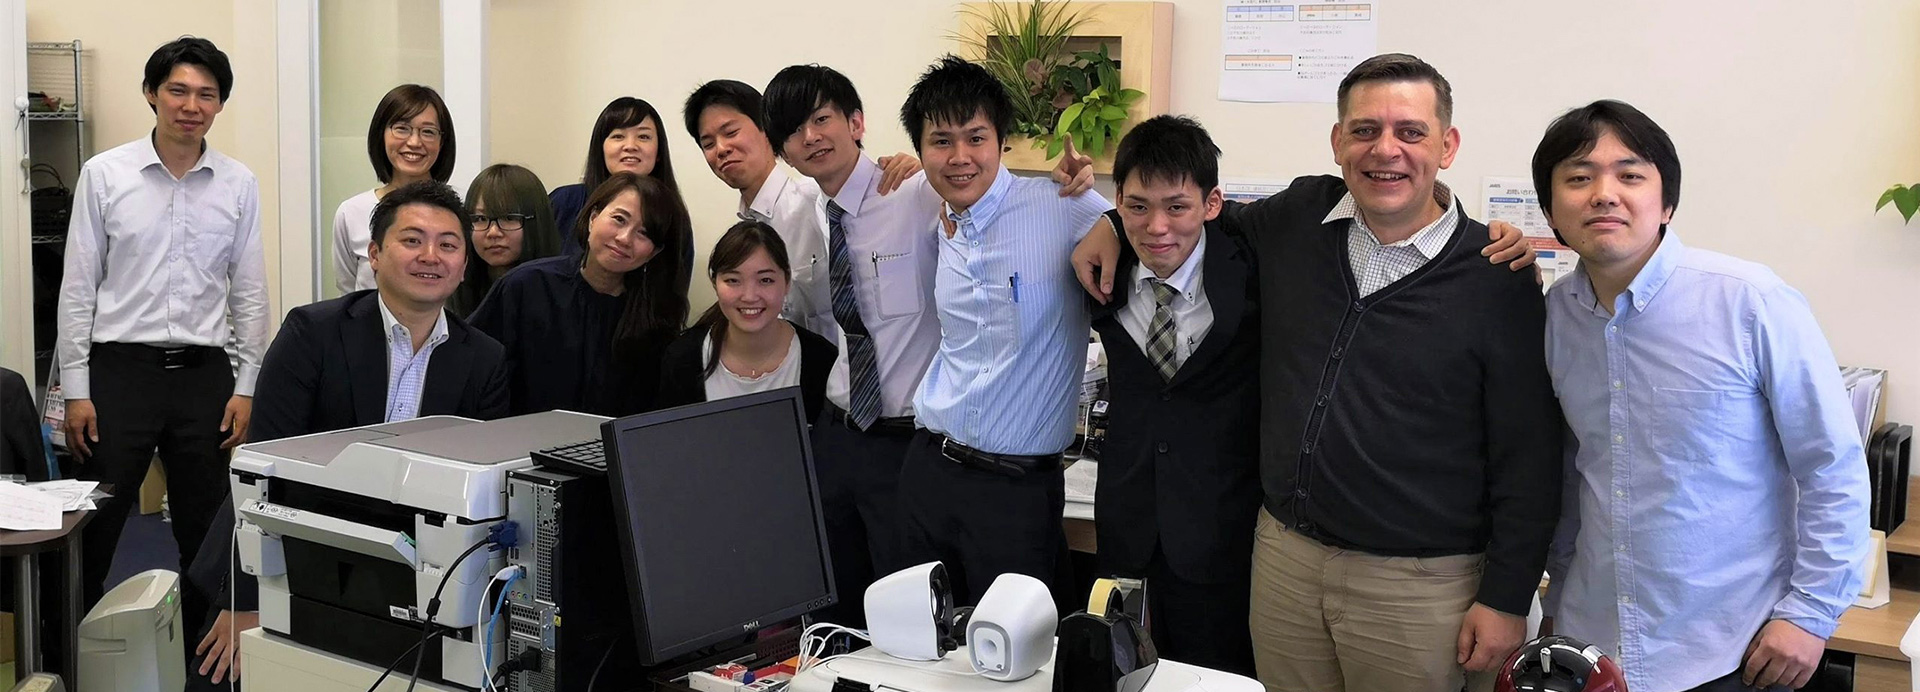 Japan automated product photography team